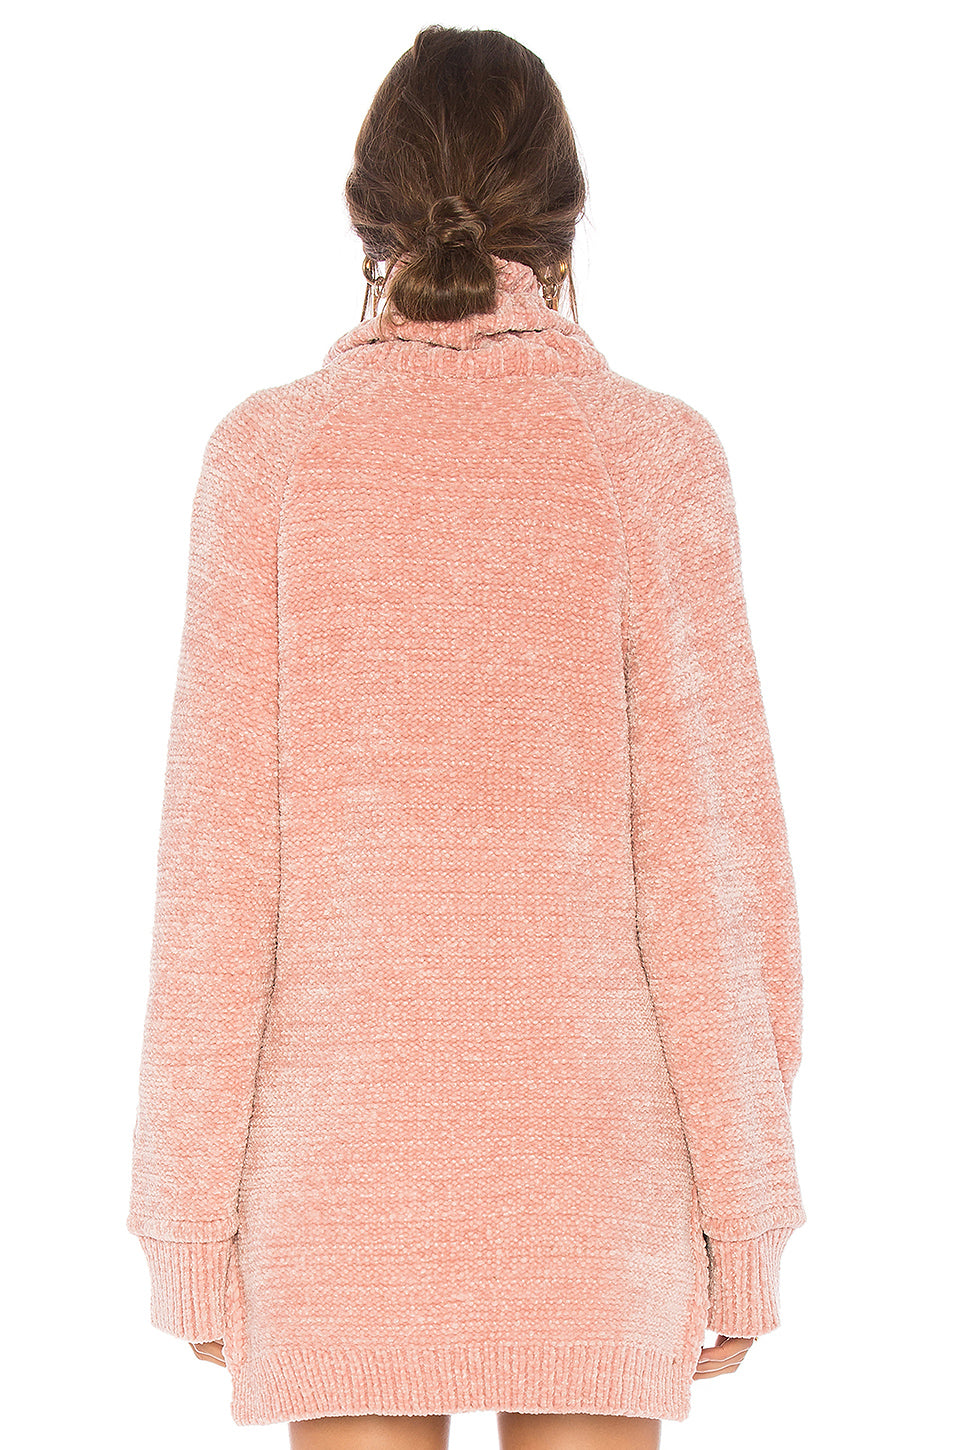 Payson Chenille Sweater in PINK